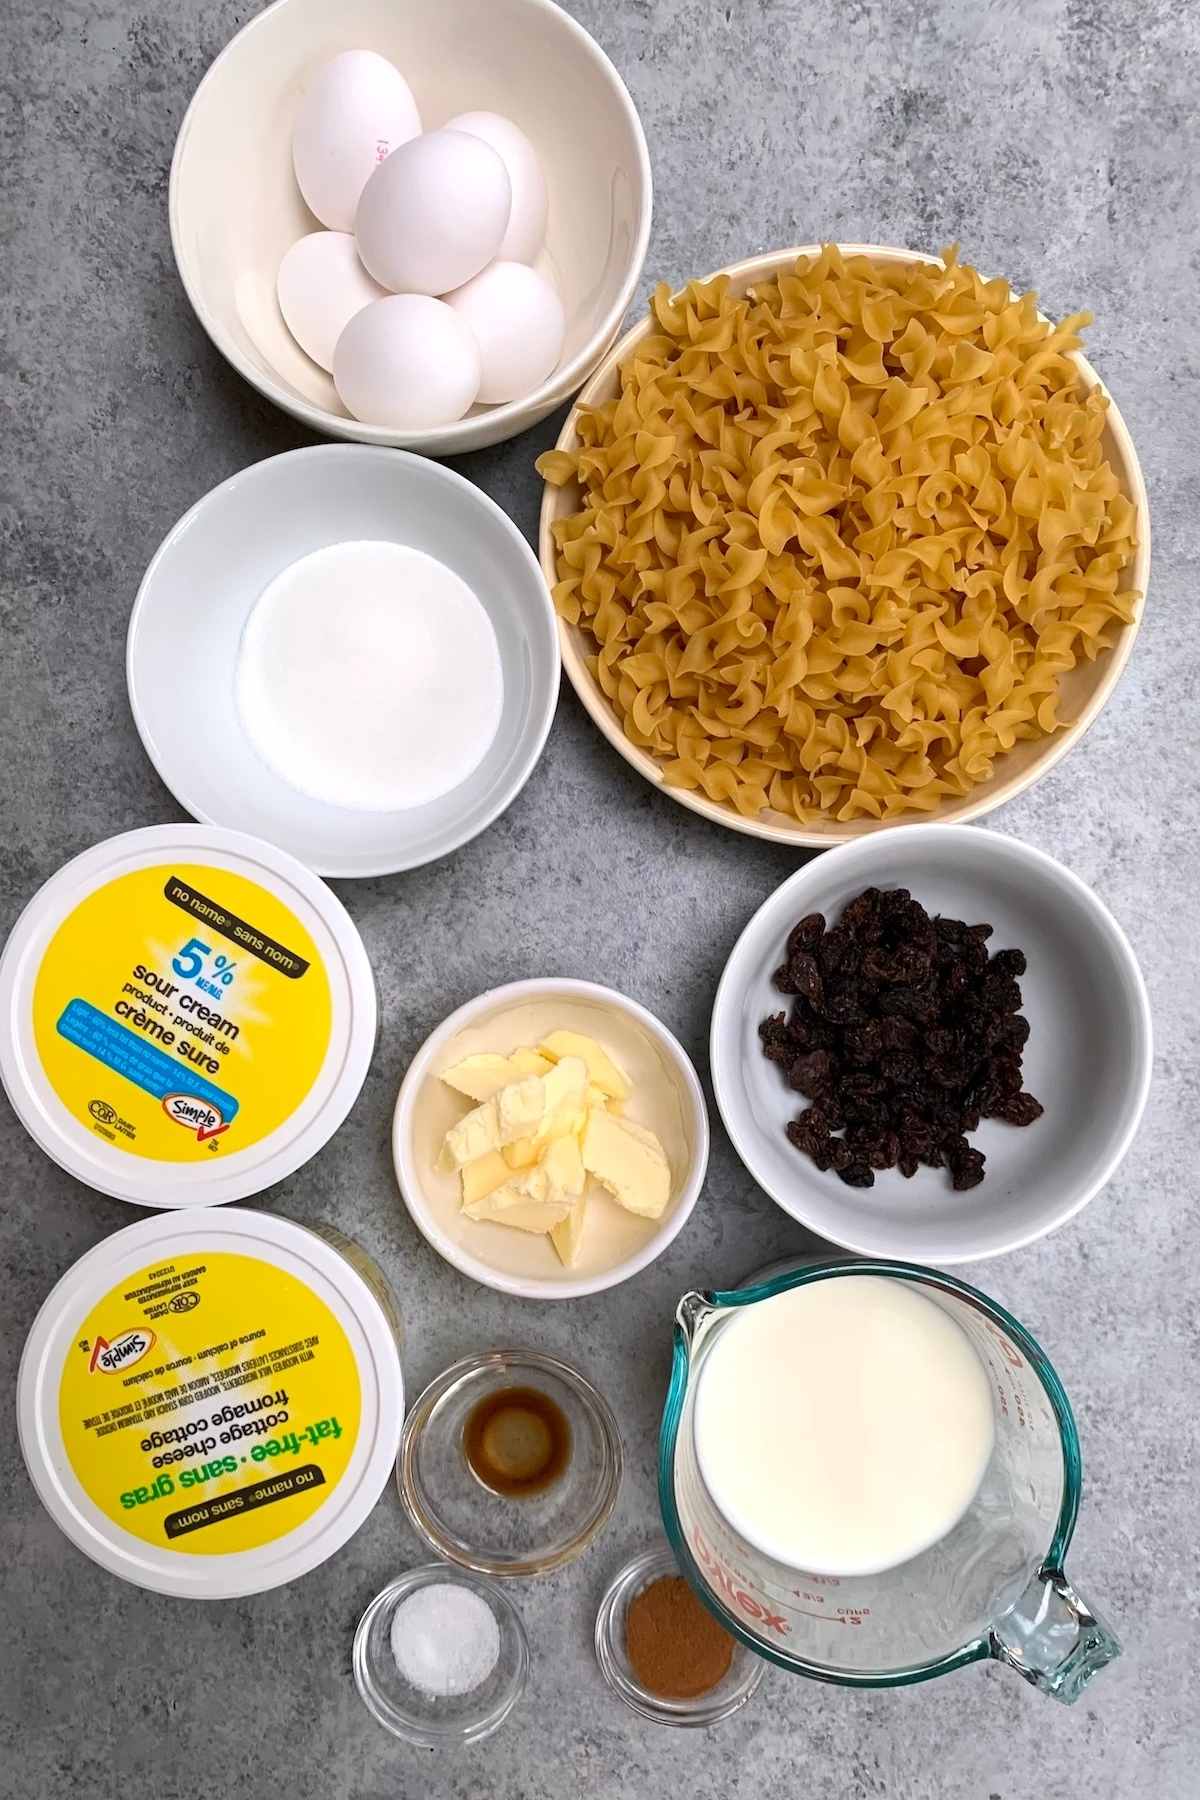 Kugel ingredients on the counter